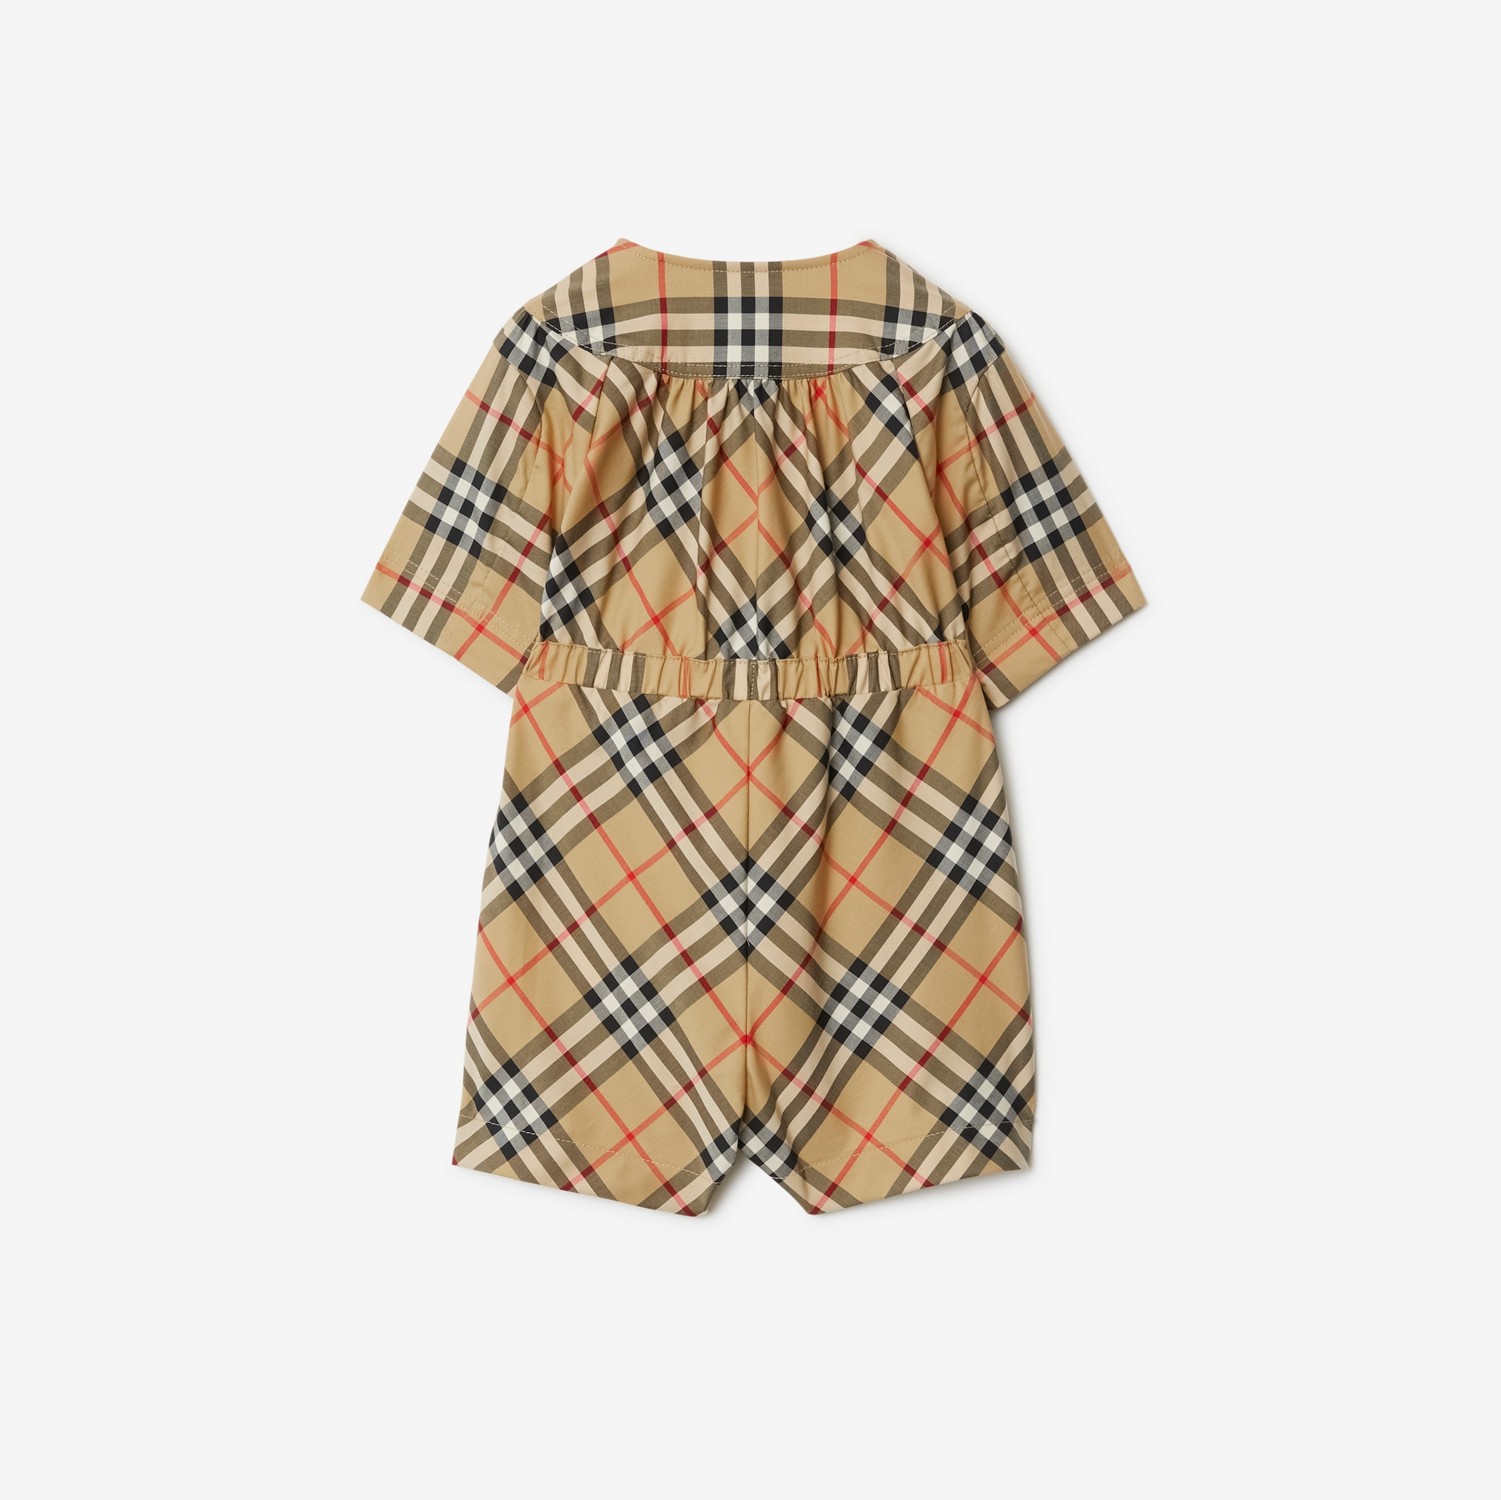 Stretchbaumwoll-Playsuit in Check